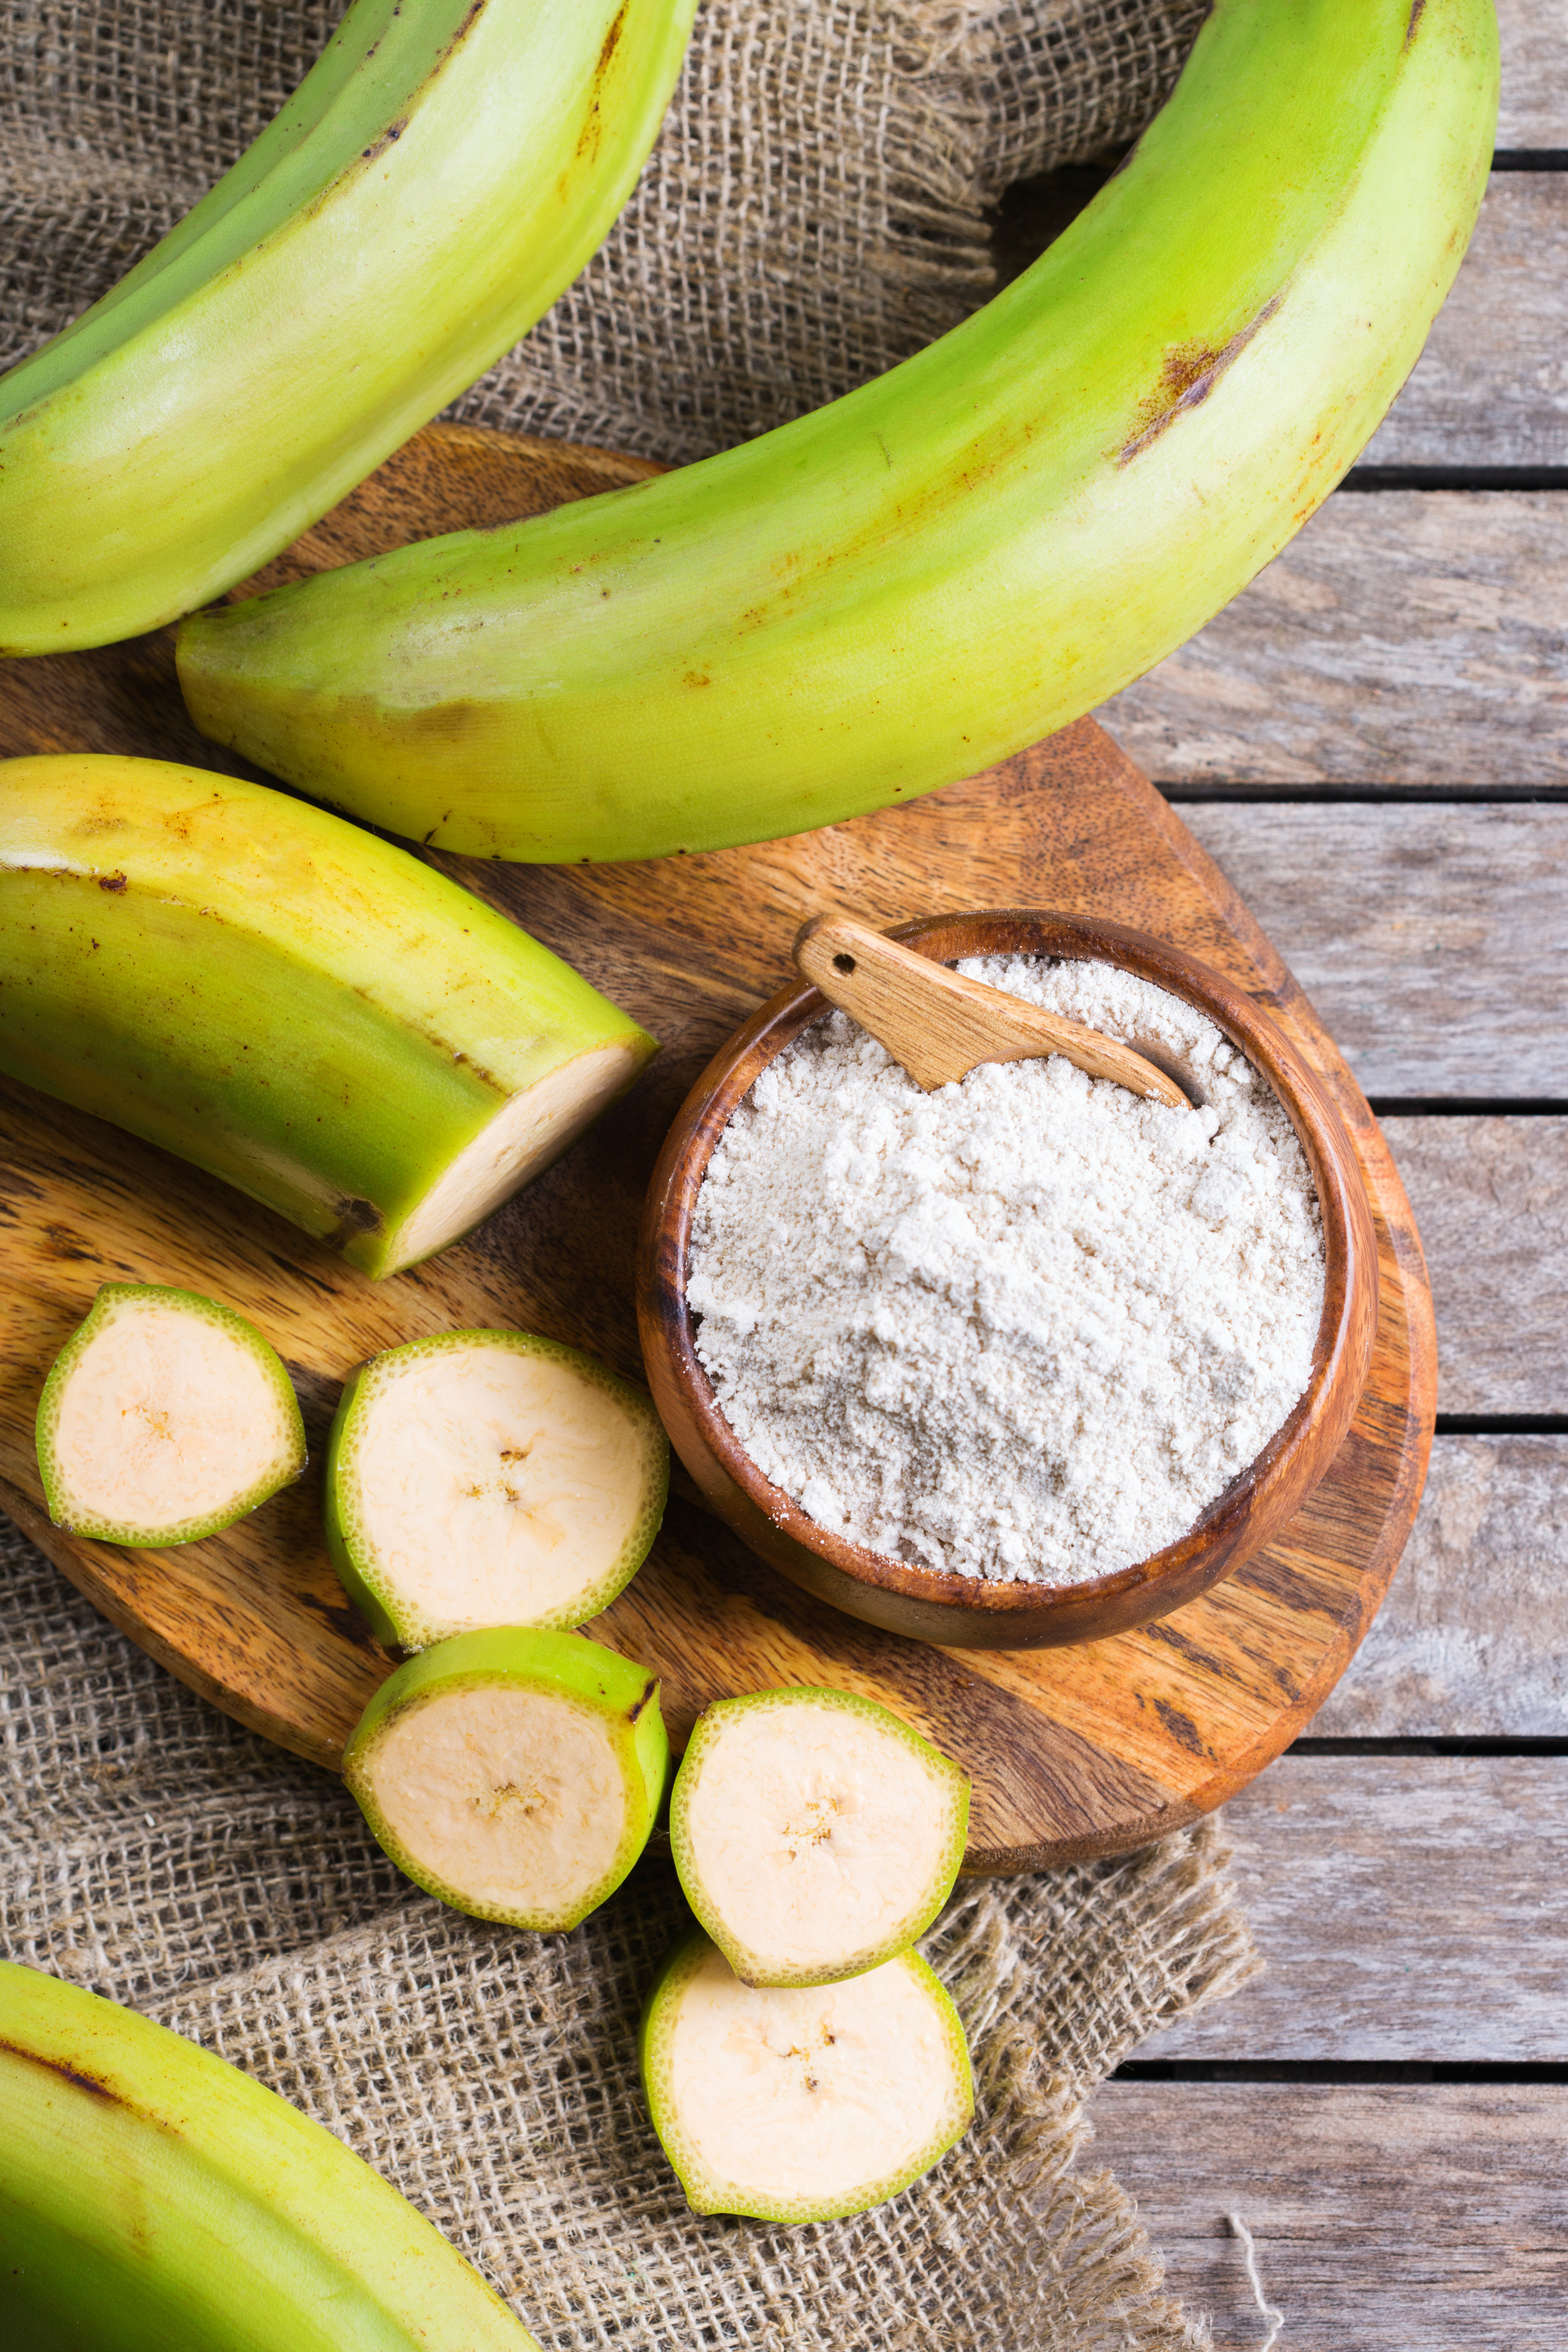 Hailed as a new superfood, green banana flour has a number of health benefits and is being used as an alternative to wheat flour in food items ranging from bread and cakes to pizza and pasta. Photo: Shutterstock